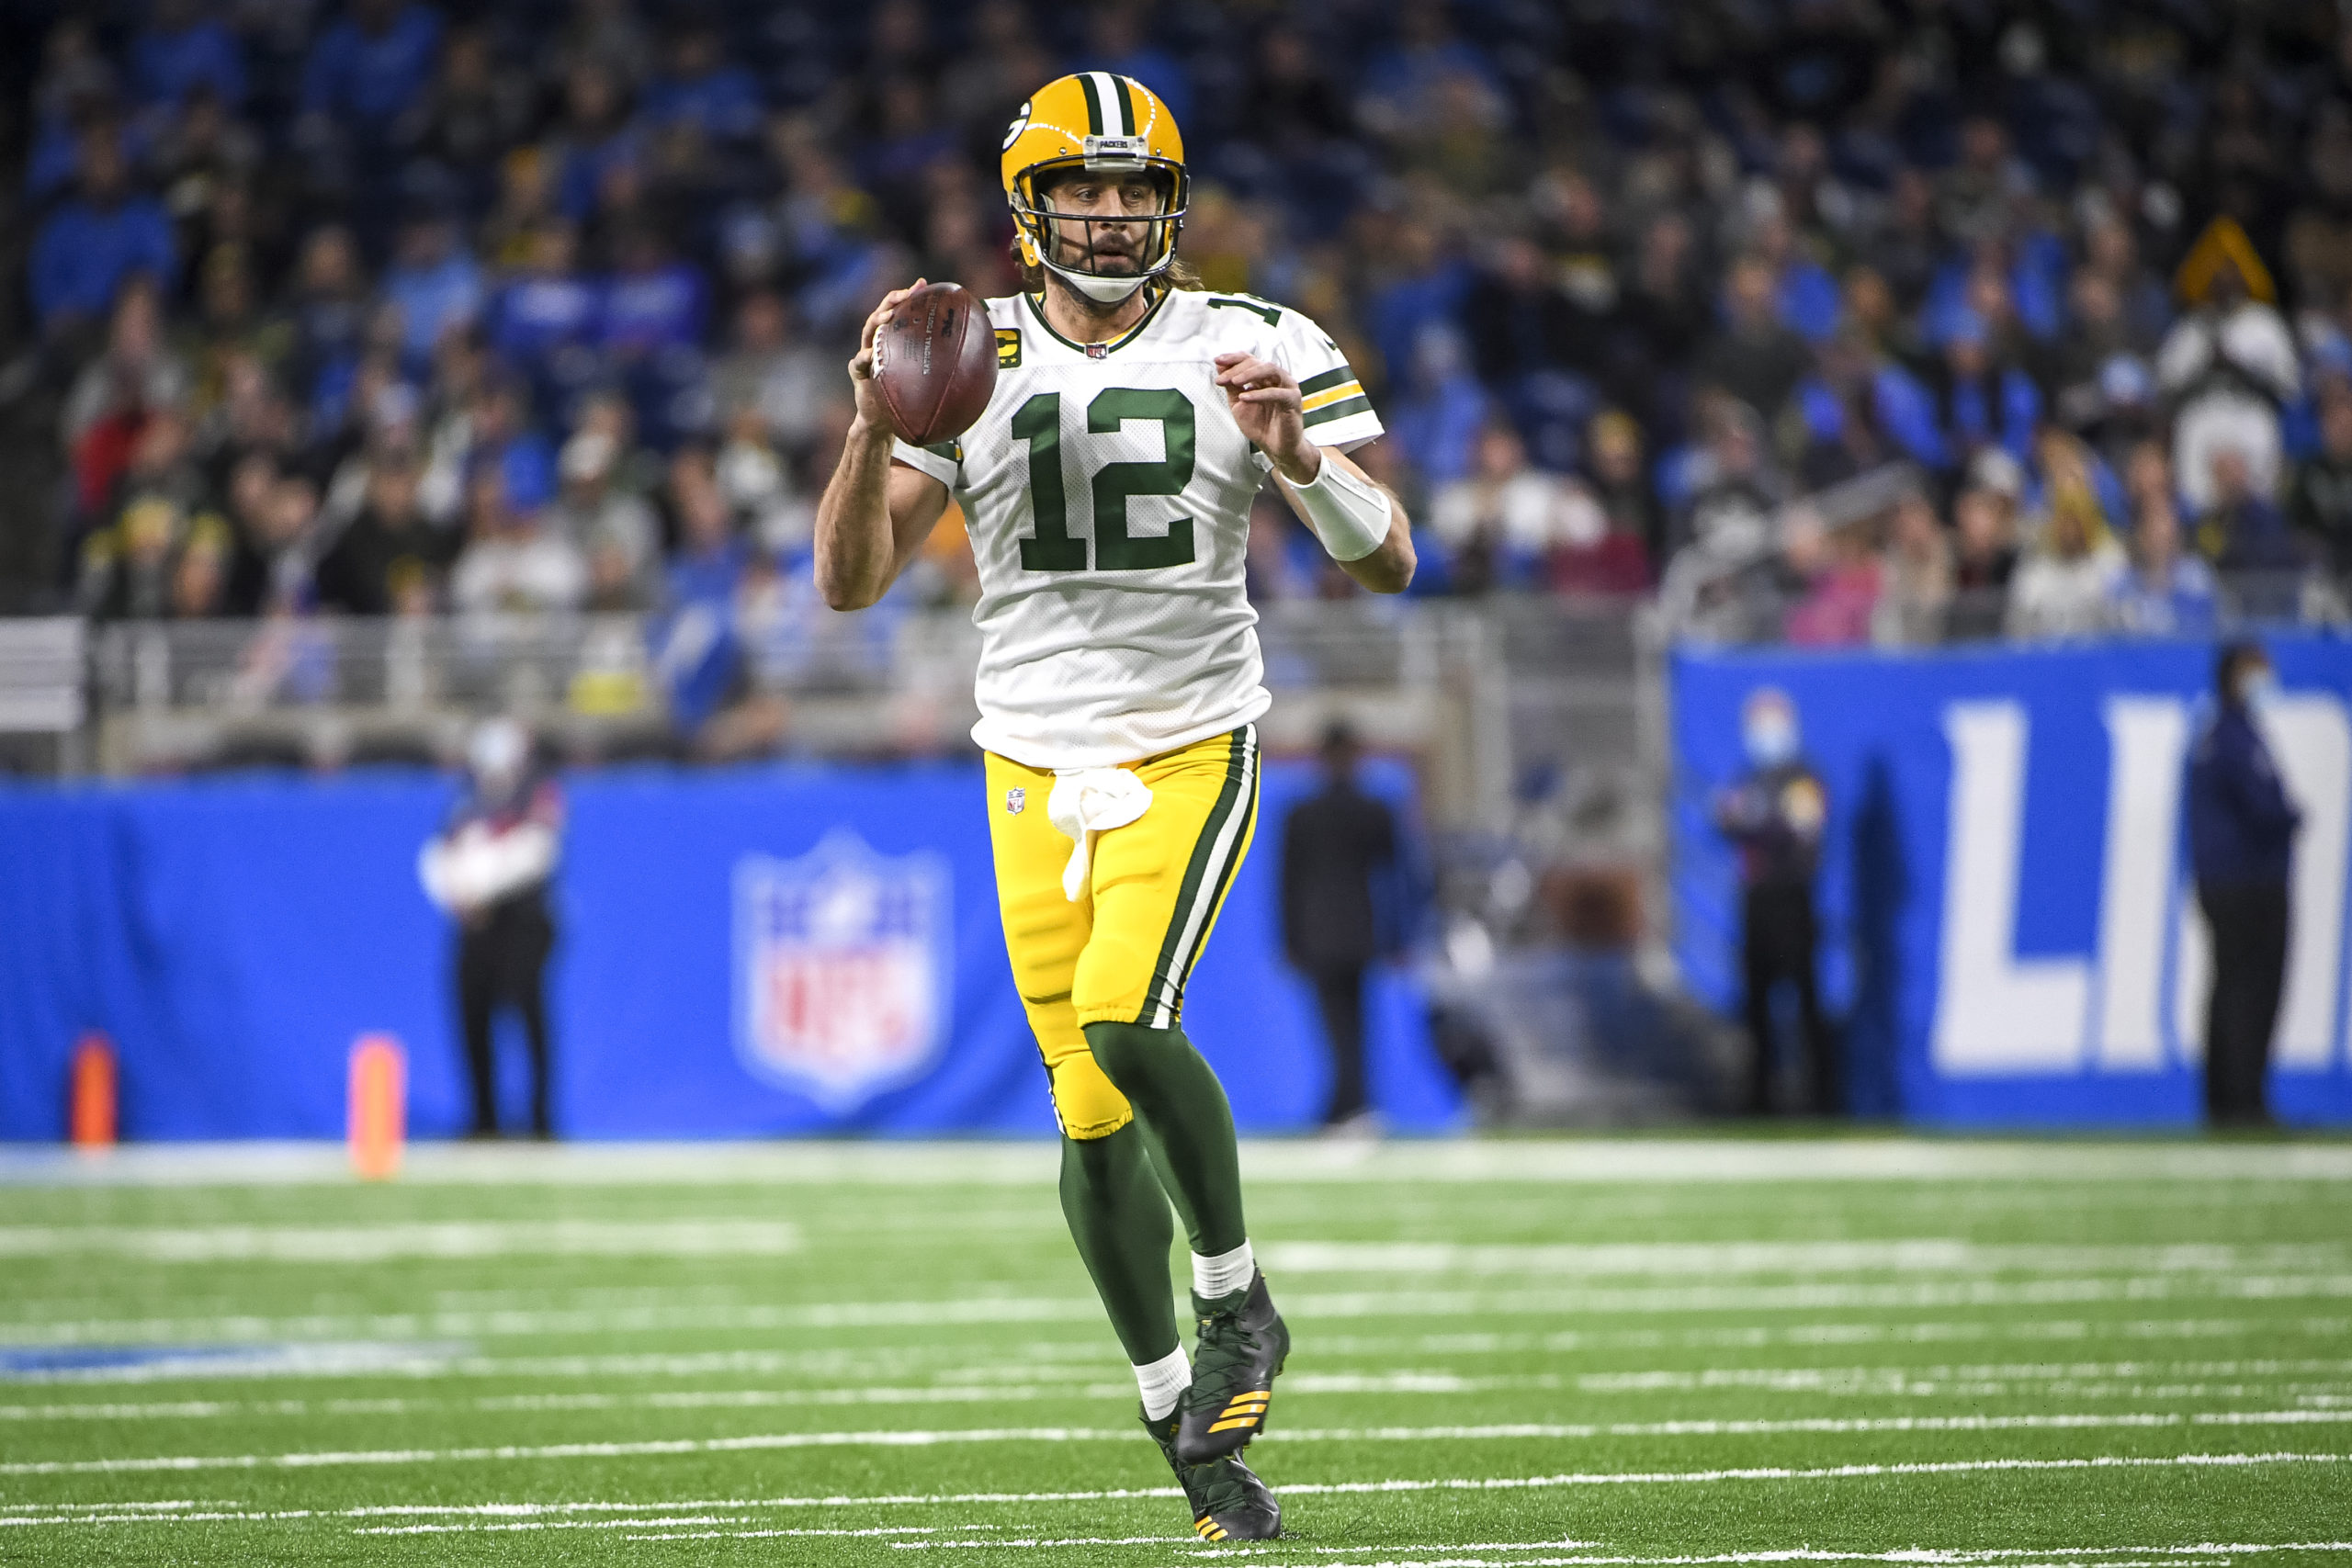 DETROIT, MICHIGAN - JANUARY 09: Aaron Rodgers #12 of the Green Bay Packers looks to pass against the Detroit Lions at Ford Field on January 09, 2022 in Detroit, Michigan. (Photo by Nic Antaya/Getty Images)